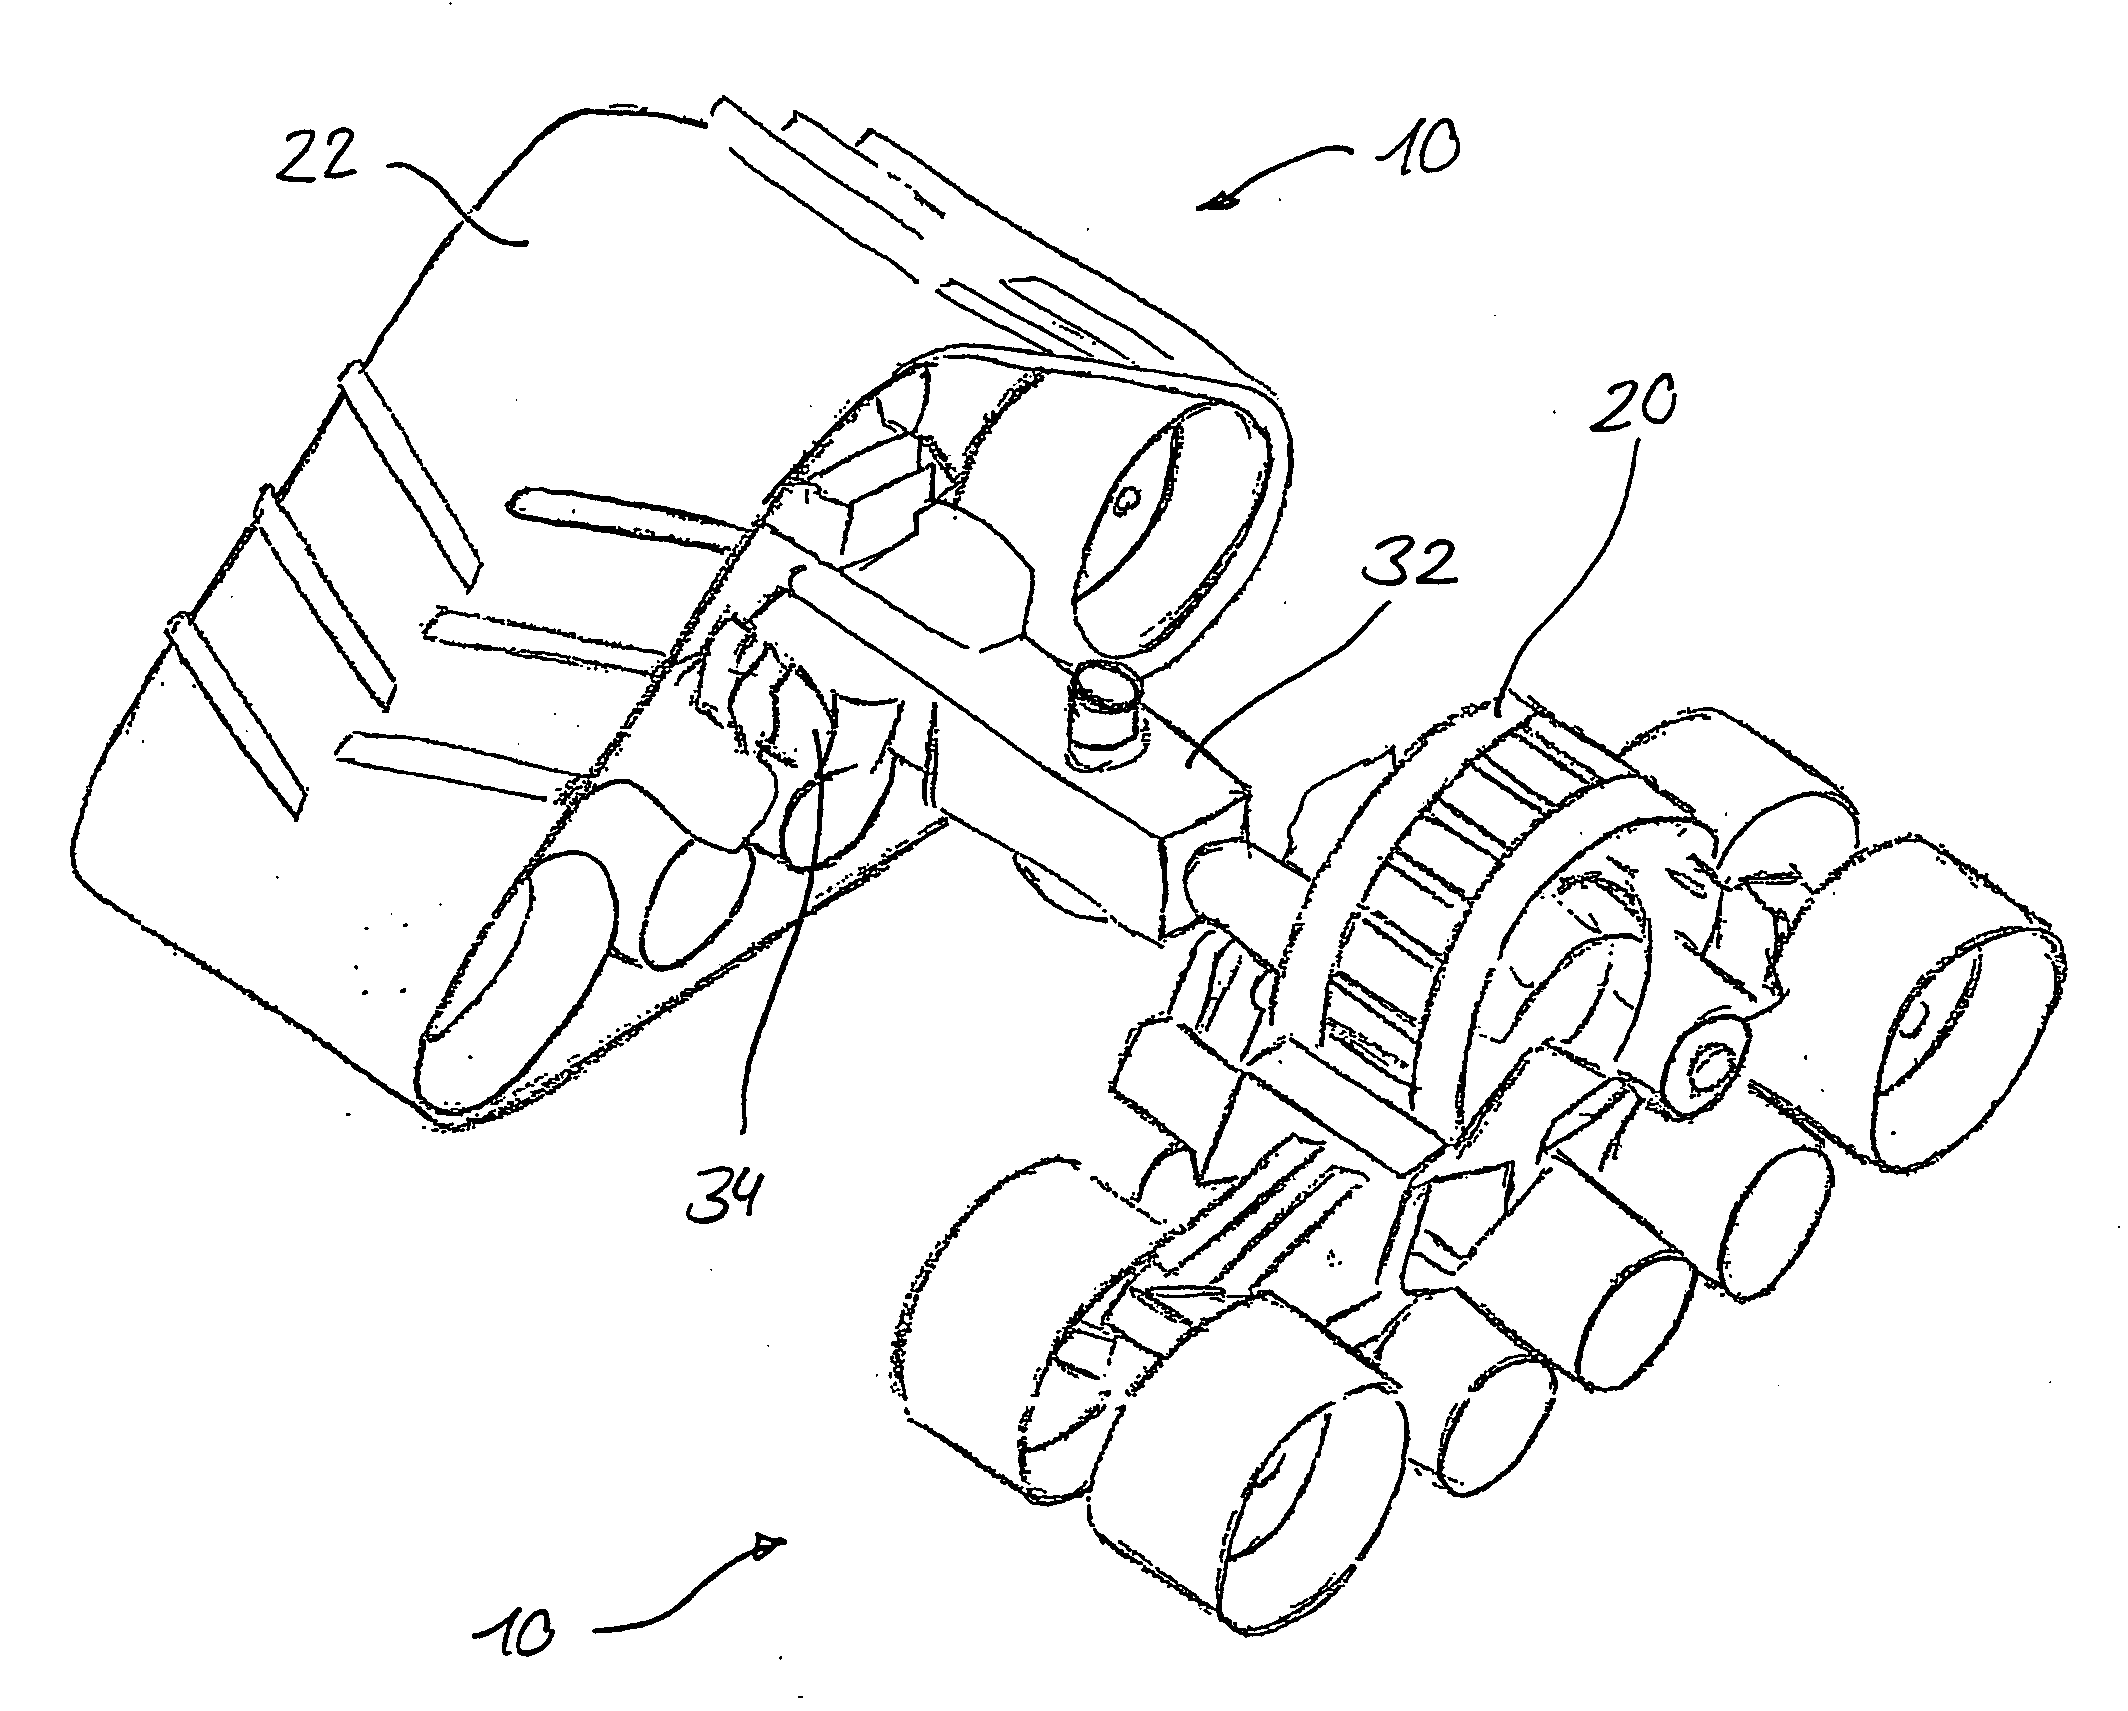 Traveling Mechanism for Agricultural Machines and Off-Road Vehicles Having an Endless Belt -Band Traveling Gear and a Corresponding Belt-Band Traveling Gear